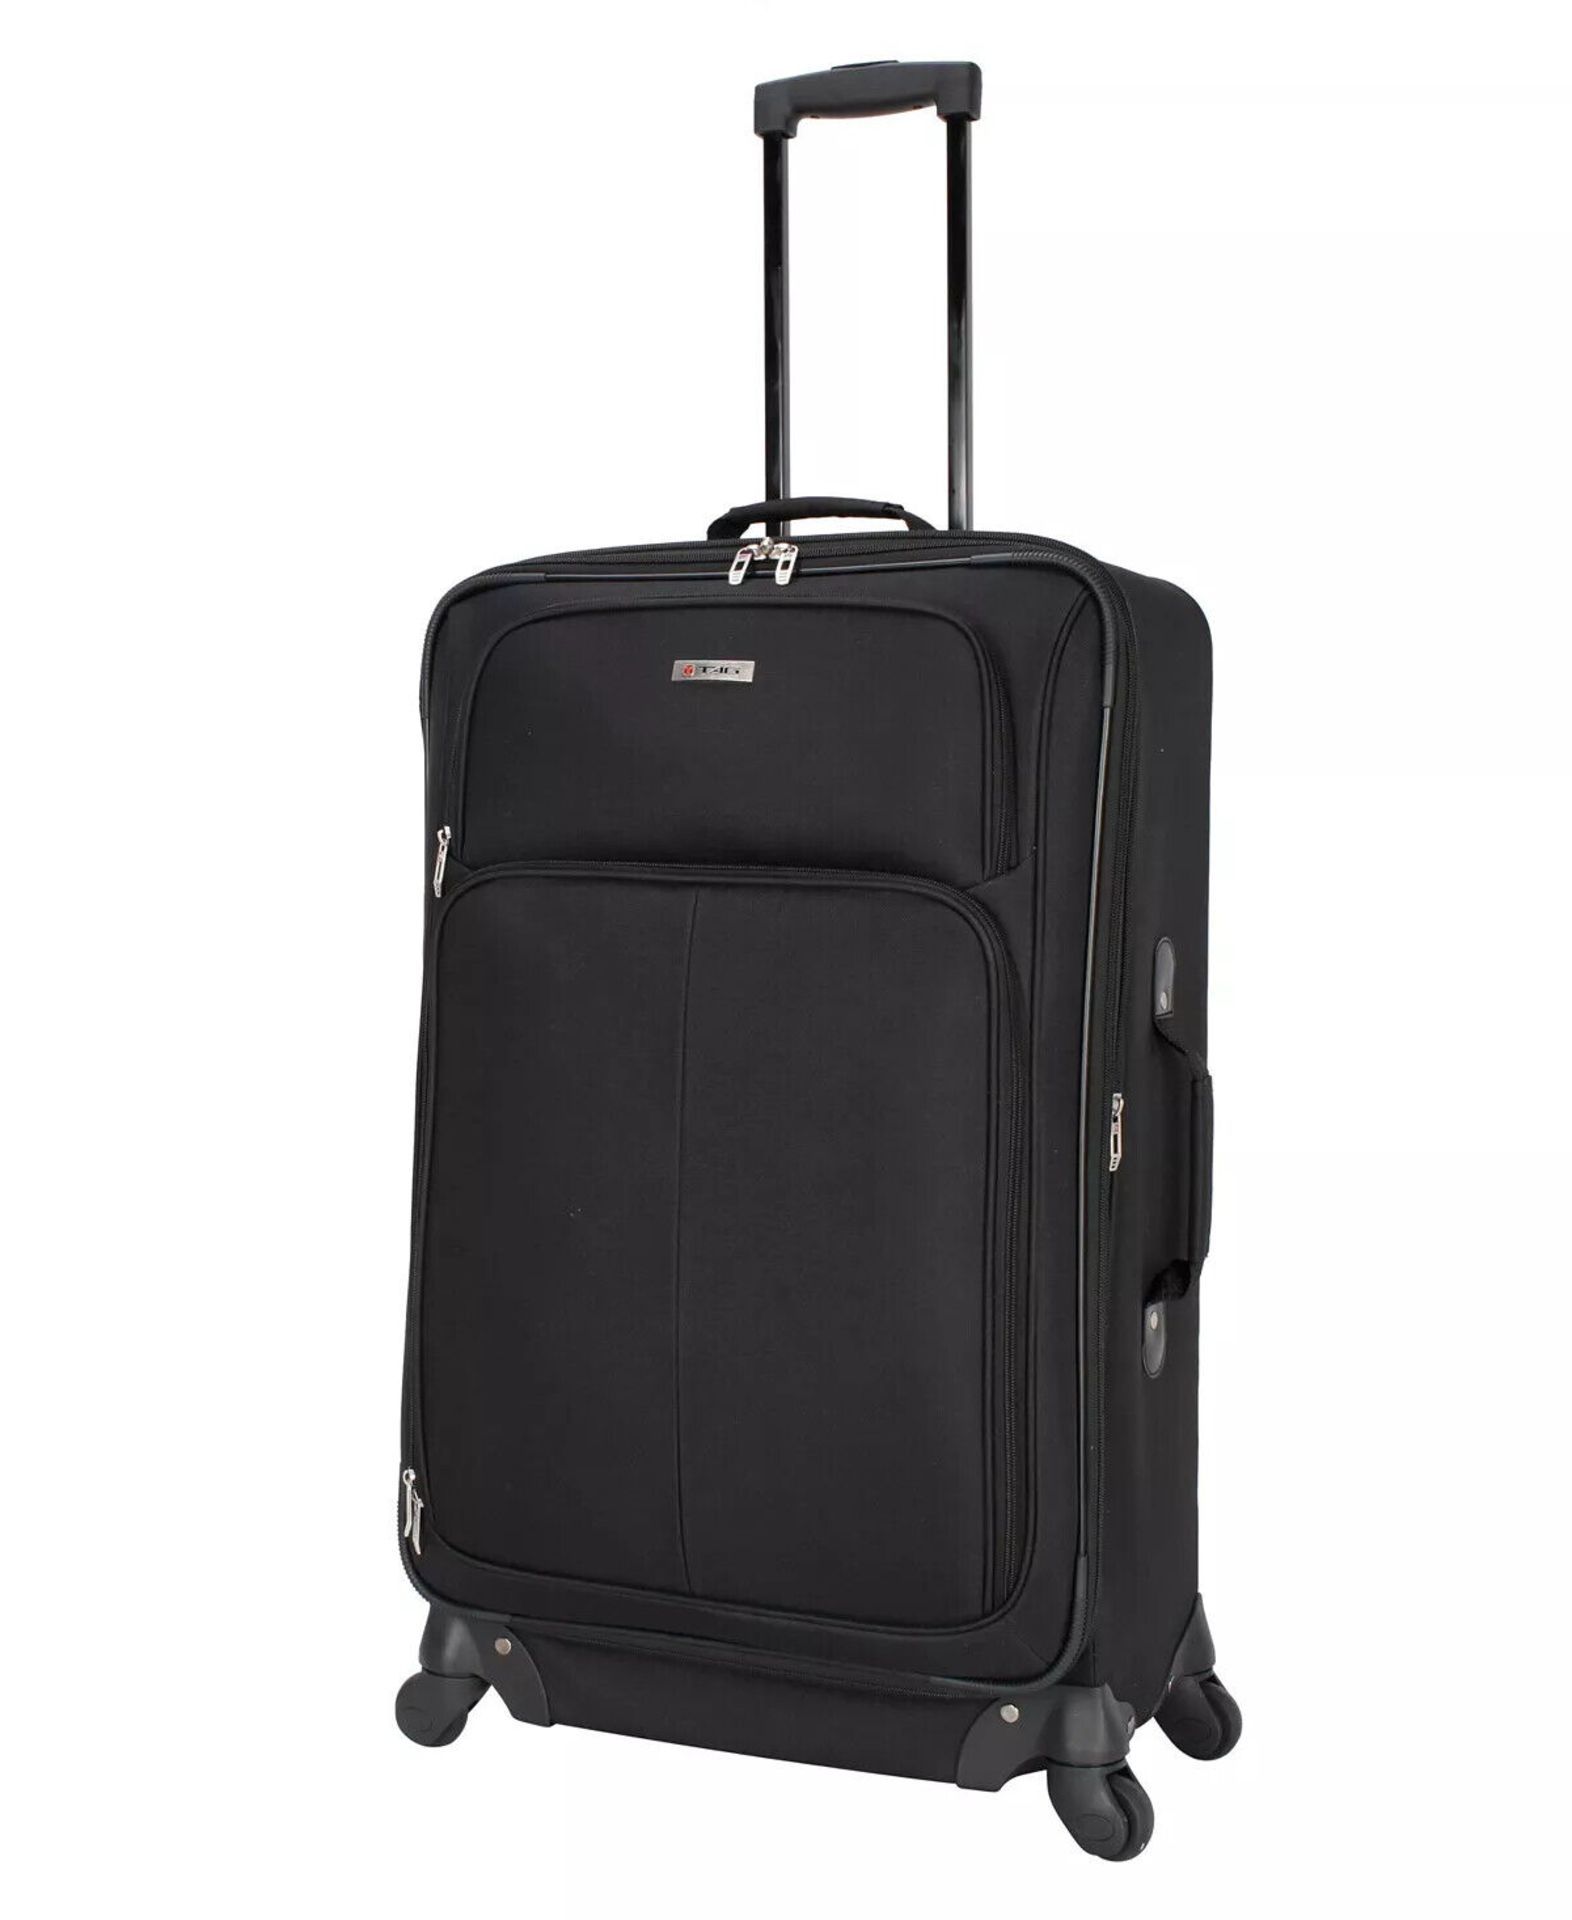 3 X NEW SETS OF TAG Ridgefield Black 5 Piece Softside Luggage Sets. RRP $300 per set, giving this - Image 4 of 4